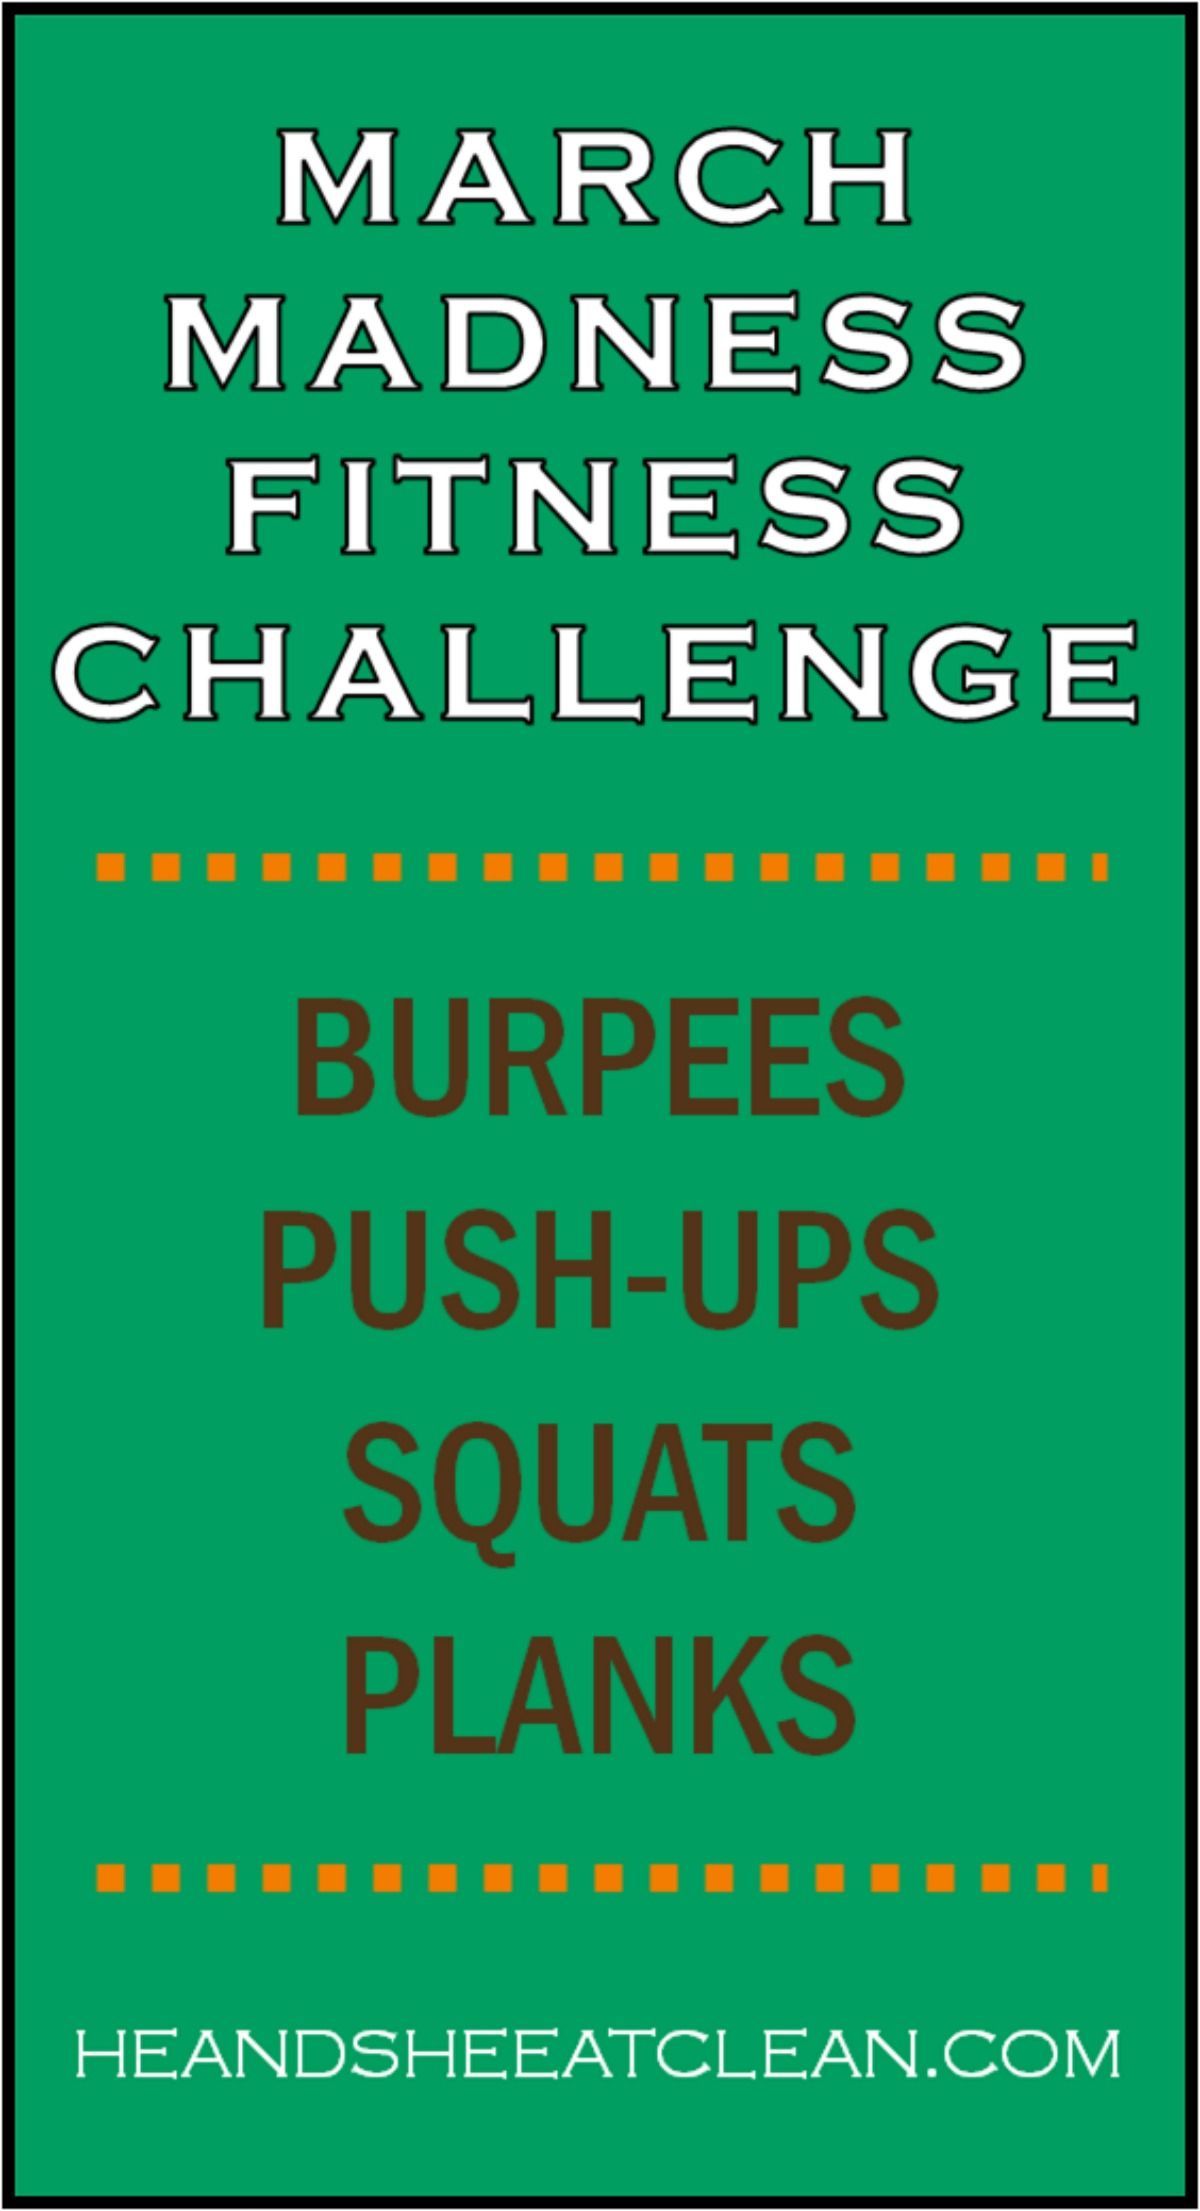 March Madness Fitness Challenge - March Madness Fitness Challenge -   9 march fitness Challenge ideas